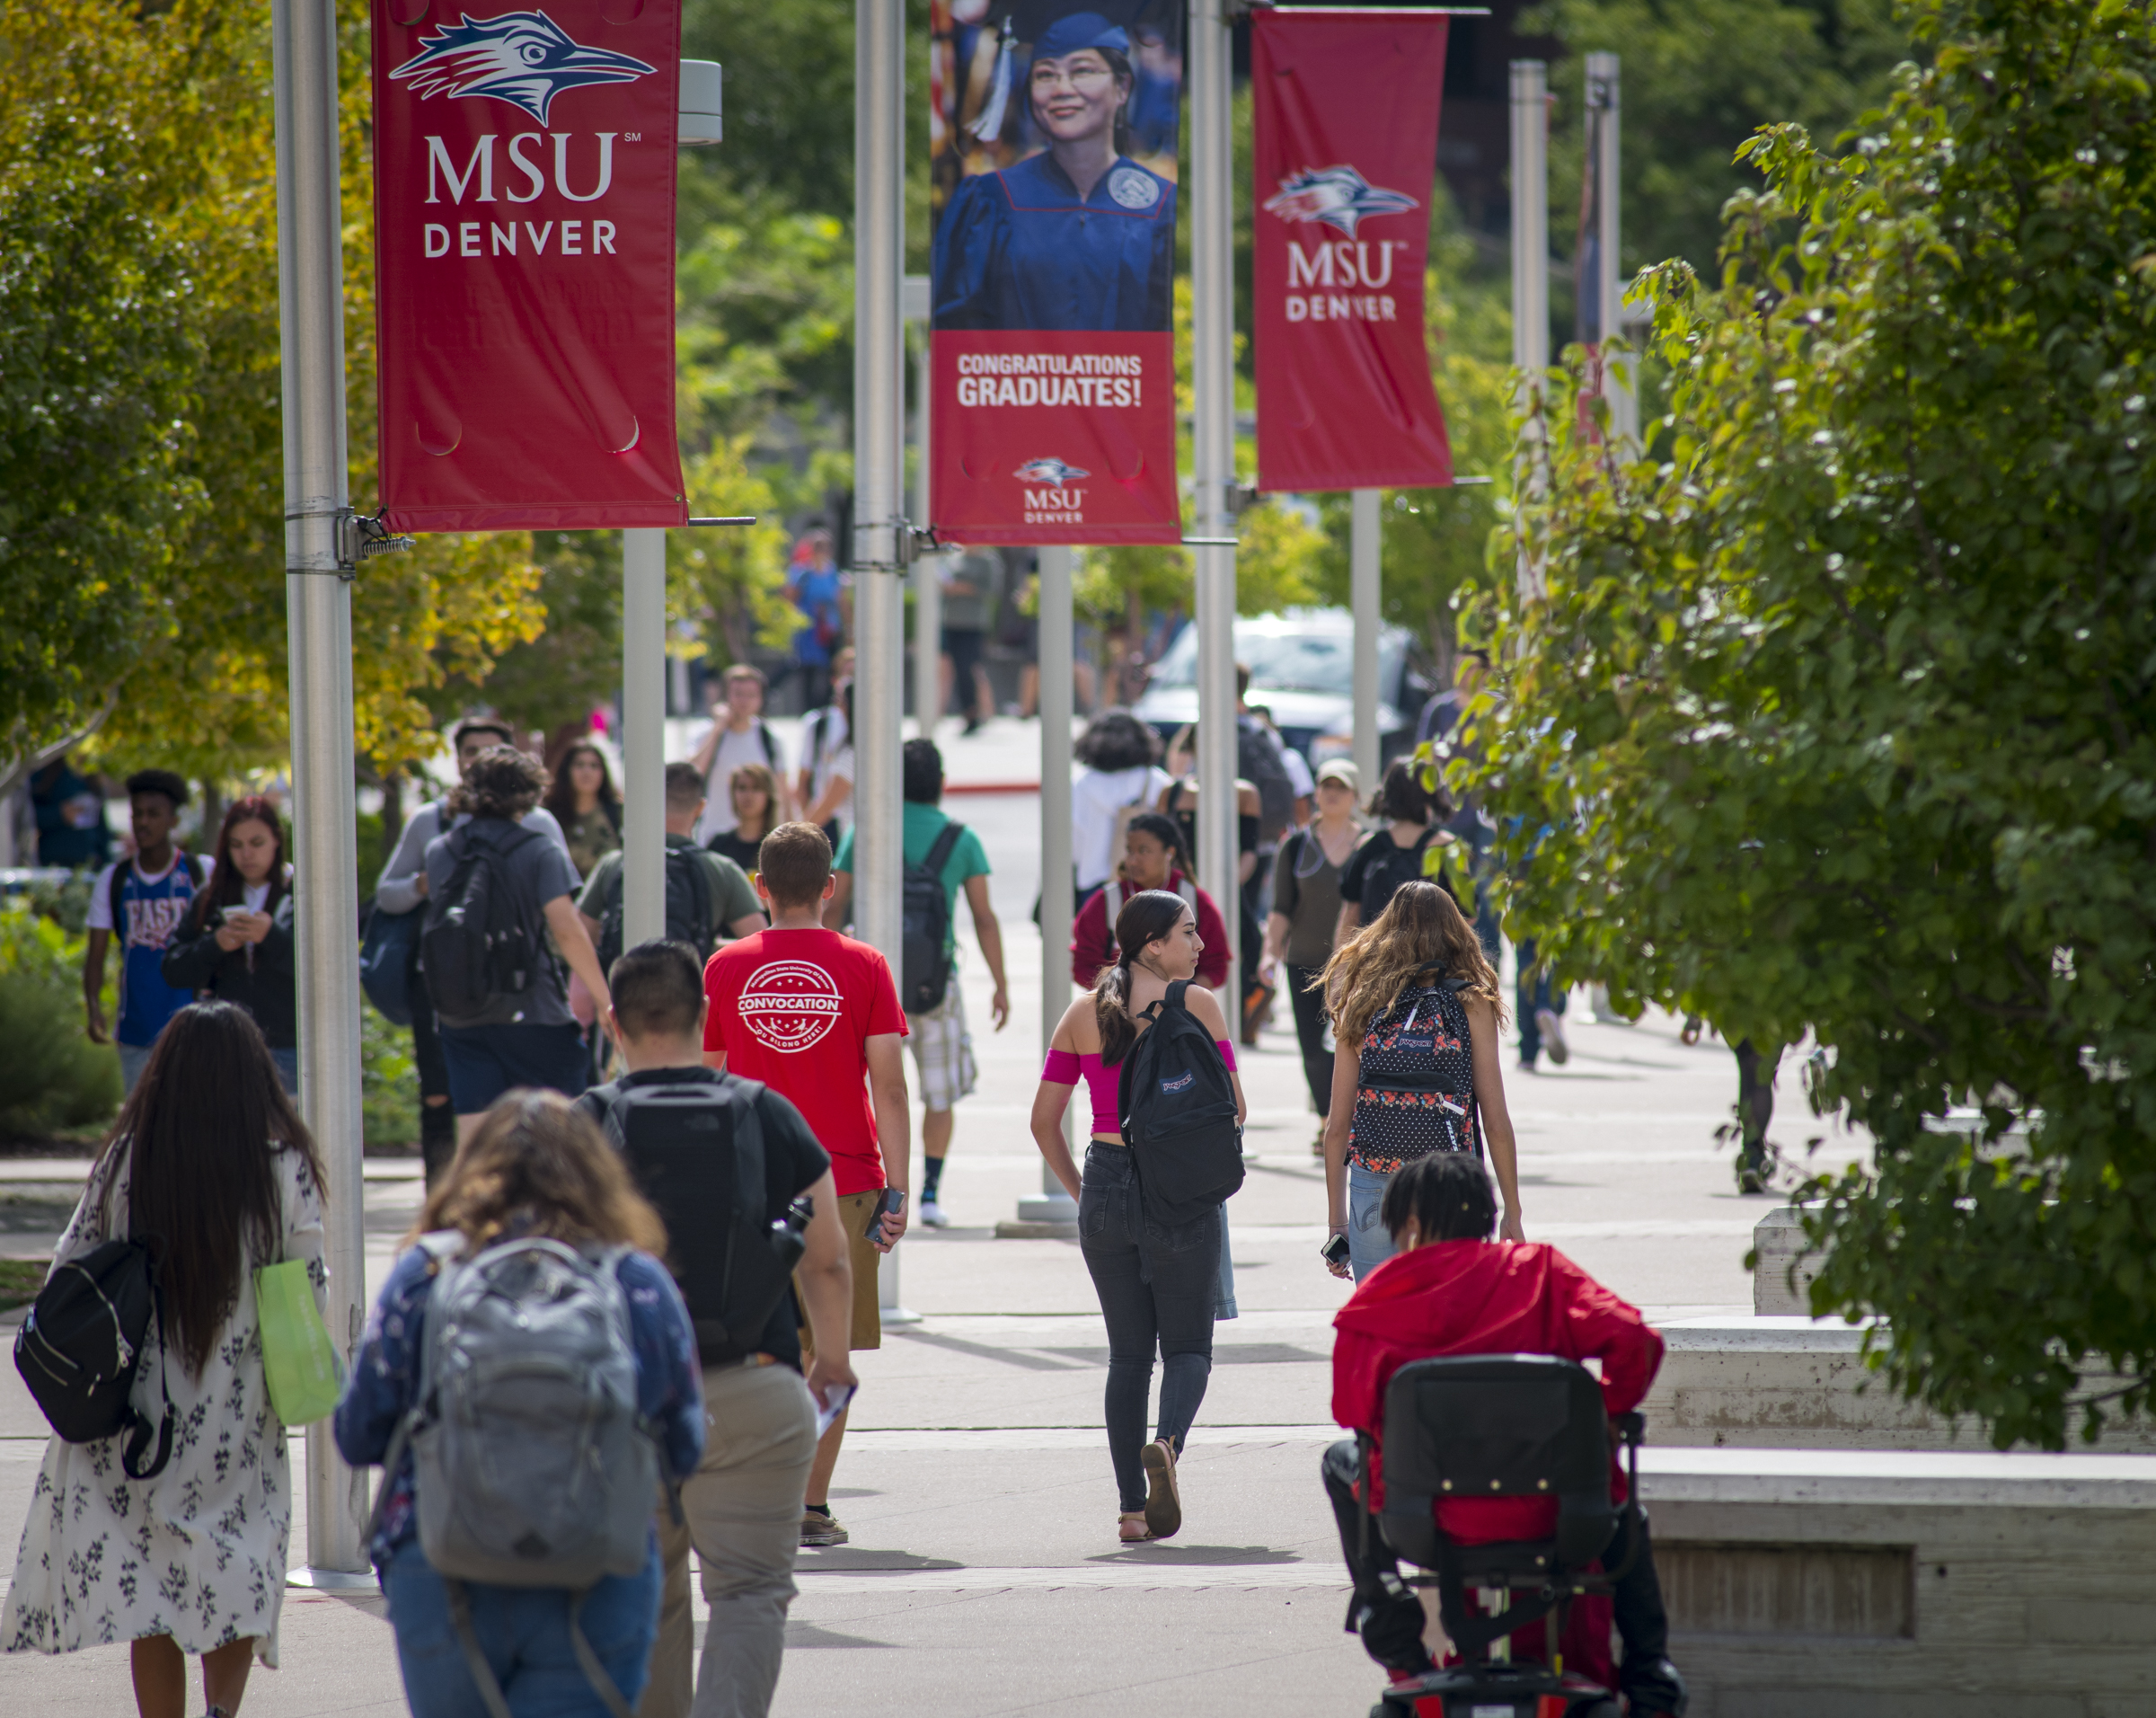 Students on campus near poles advertising MSU Denver banners